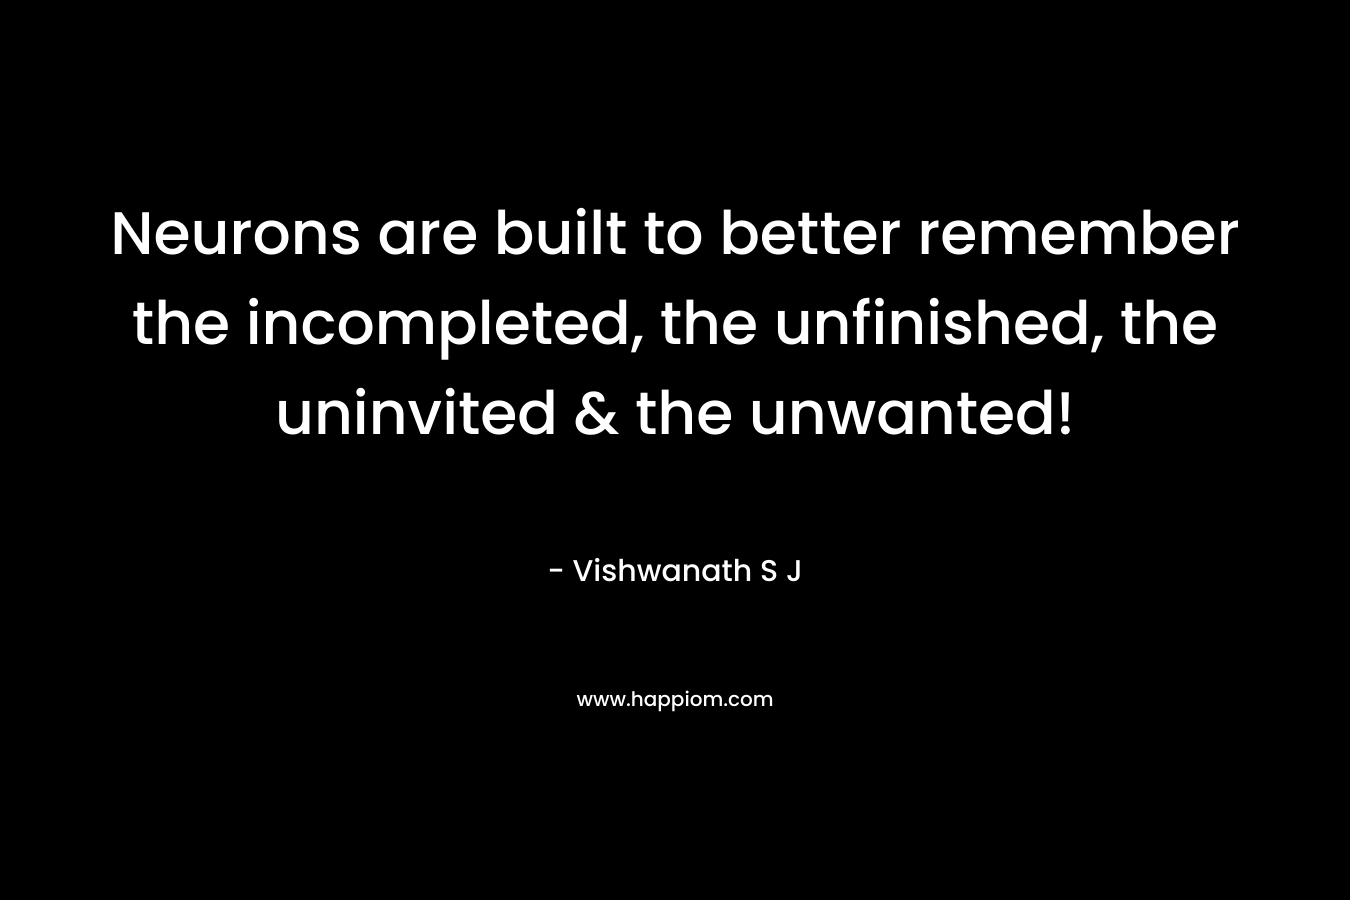 Neurons are built to better remember the incompleted, the unfinished, the uninvited & the unwanted! – Vishwanath S J